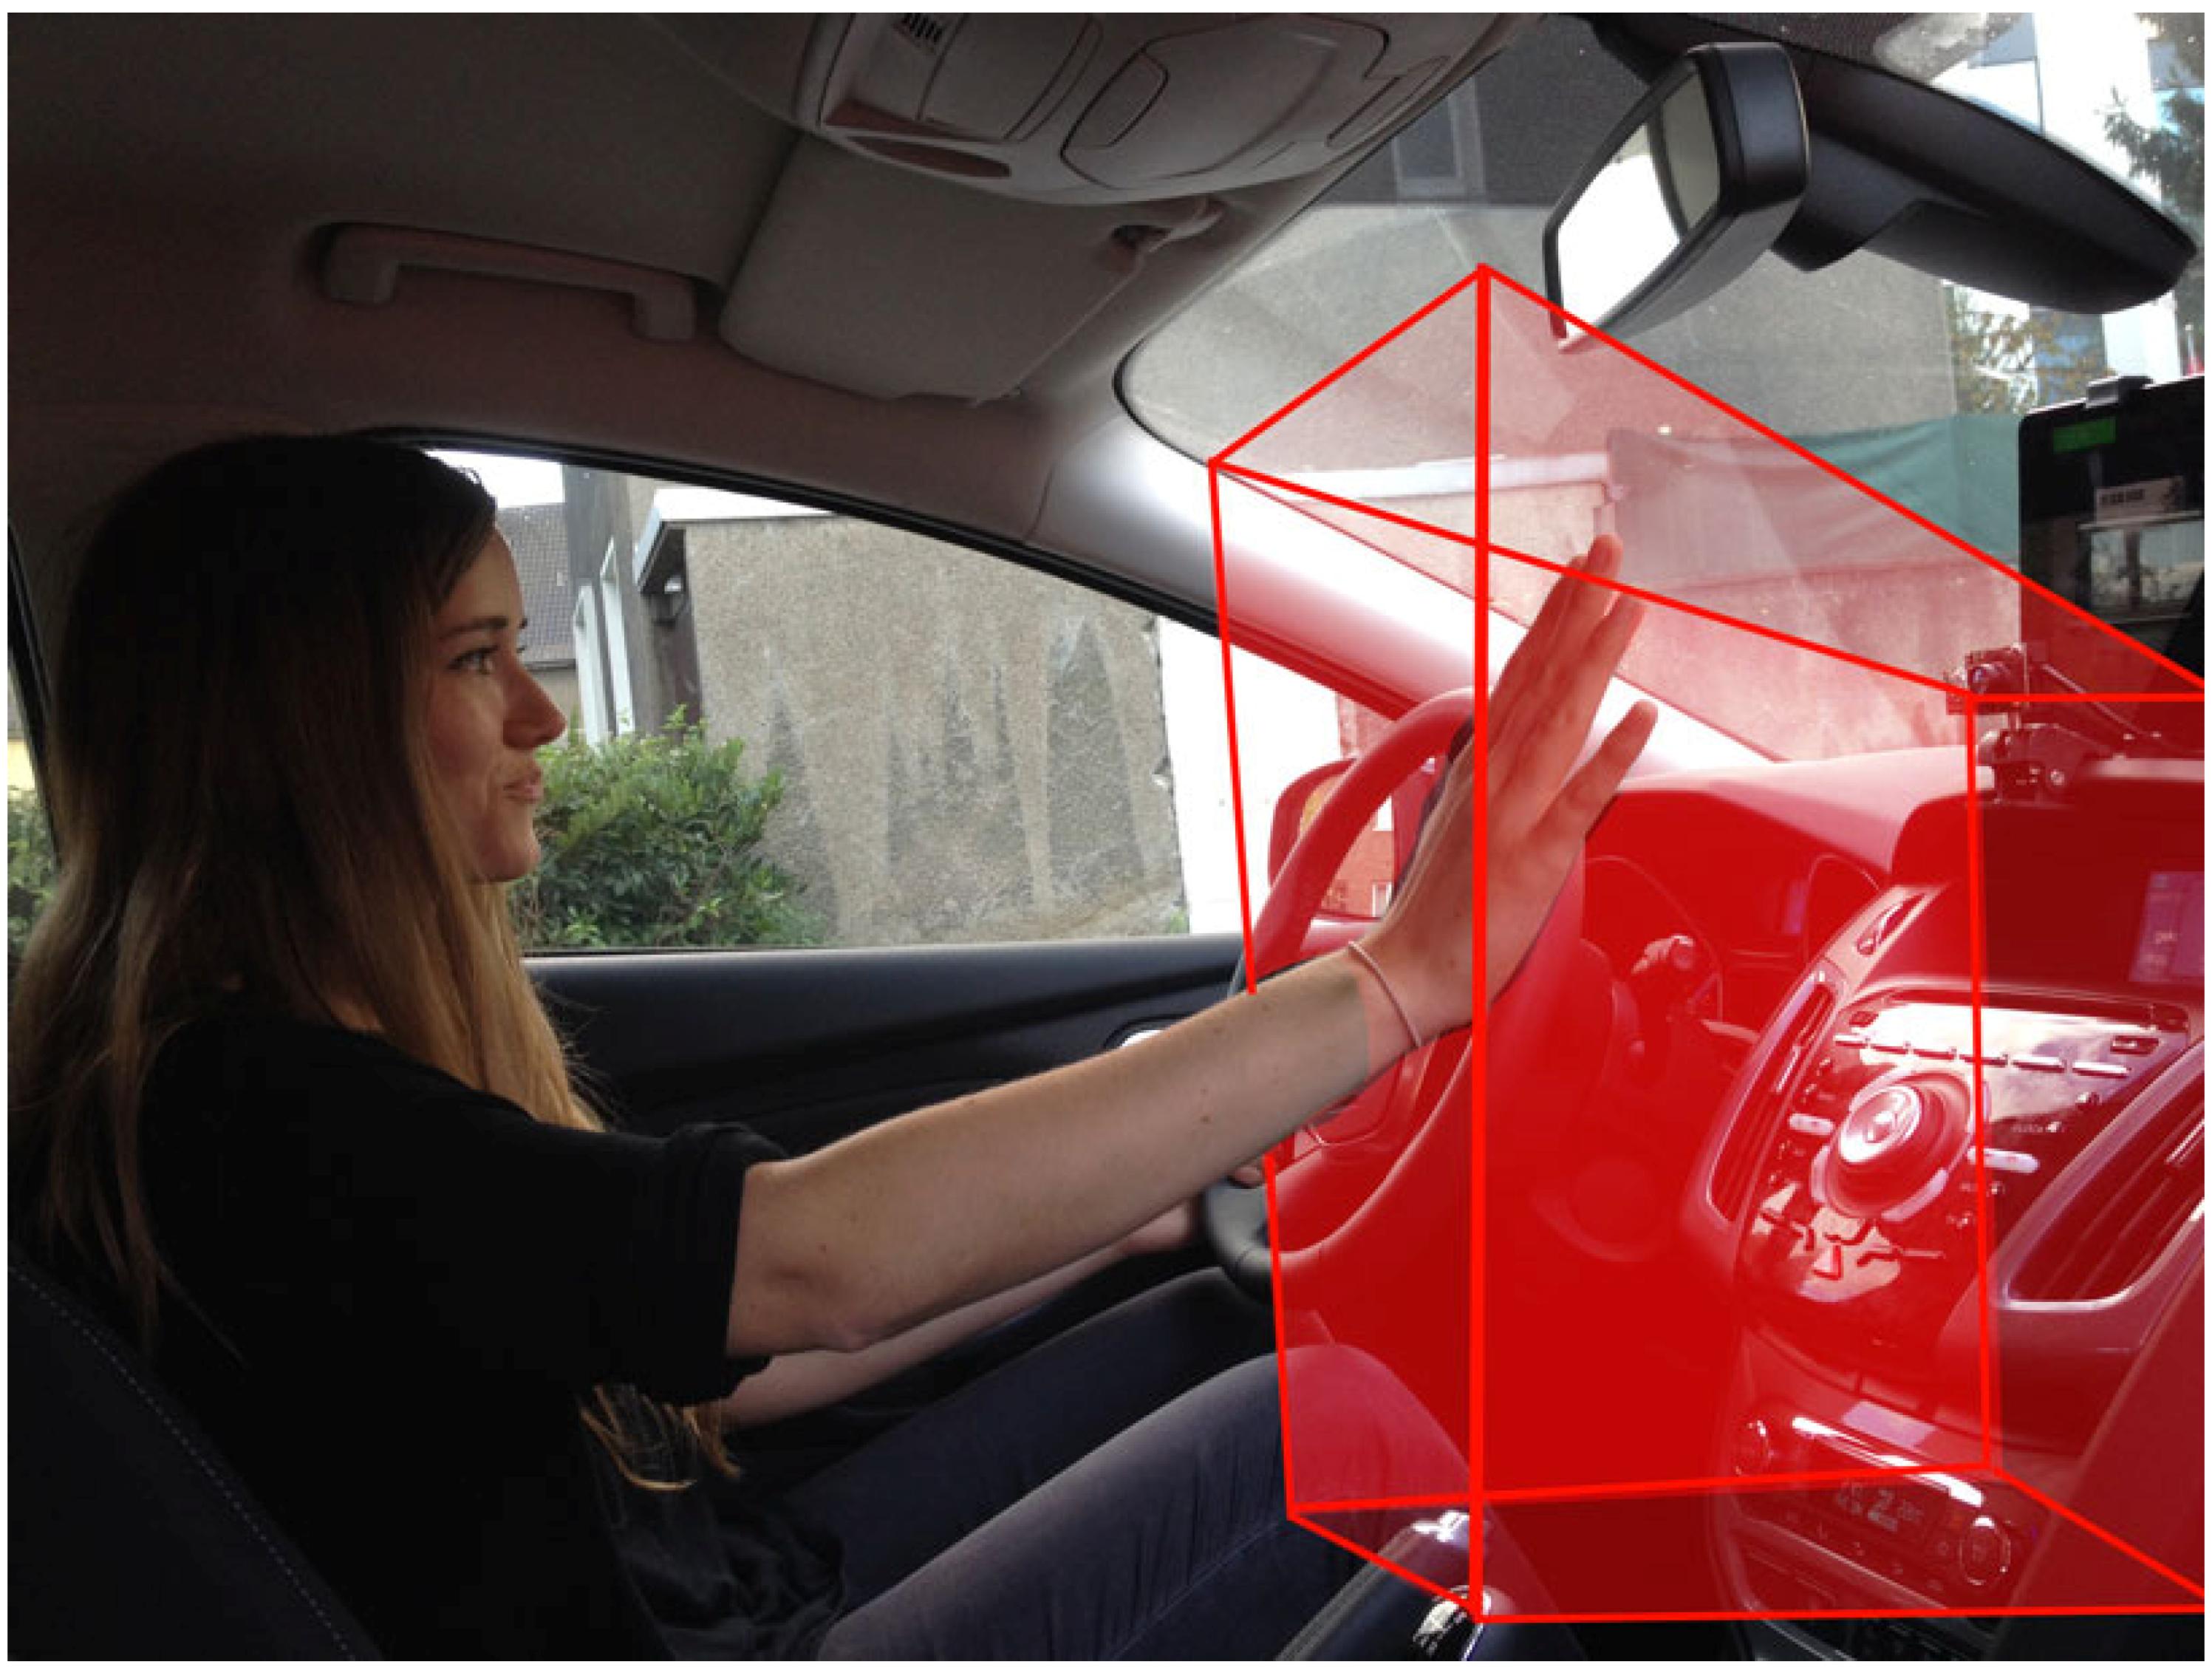 Hand Gesture Control Car: How hand gesture control cars work